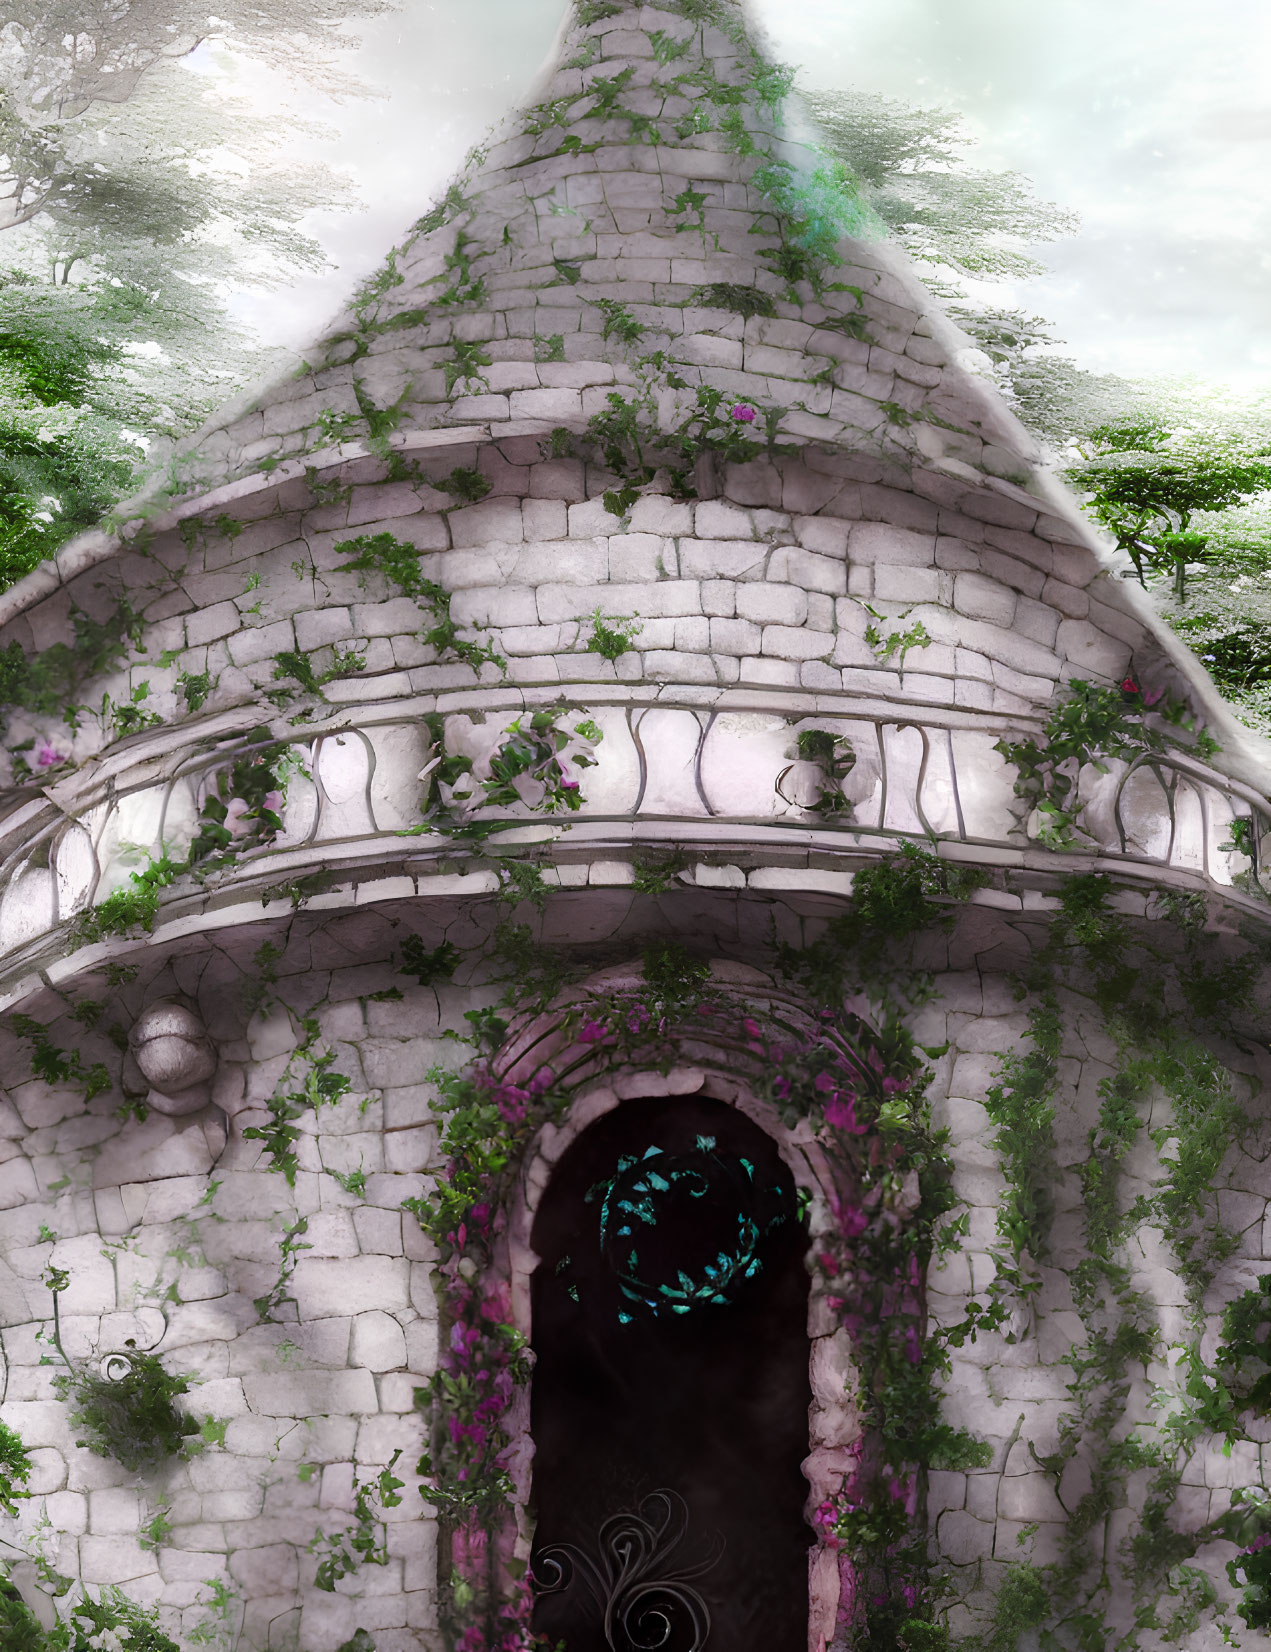 Stone tower with arched door and green vines, surrounded by ethereal trees under soft light